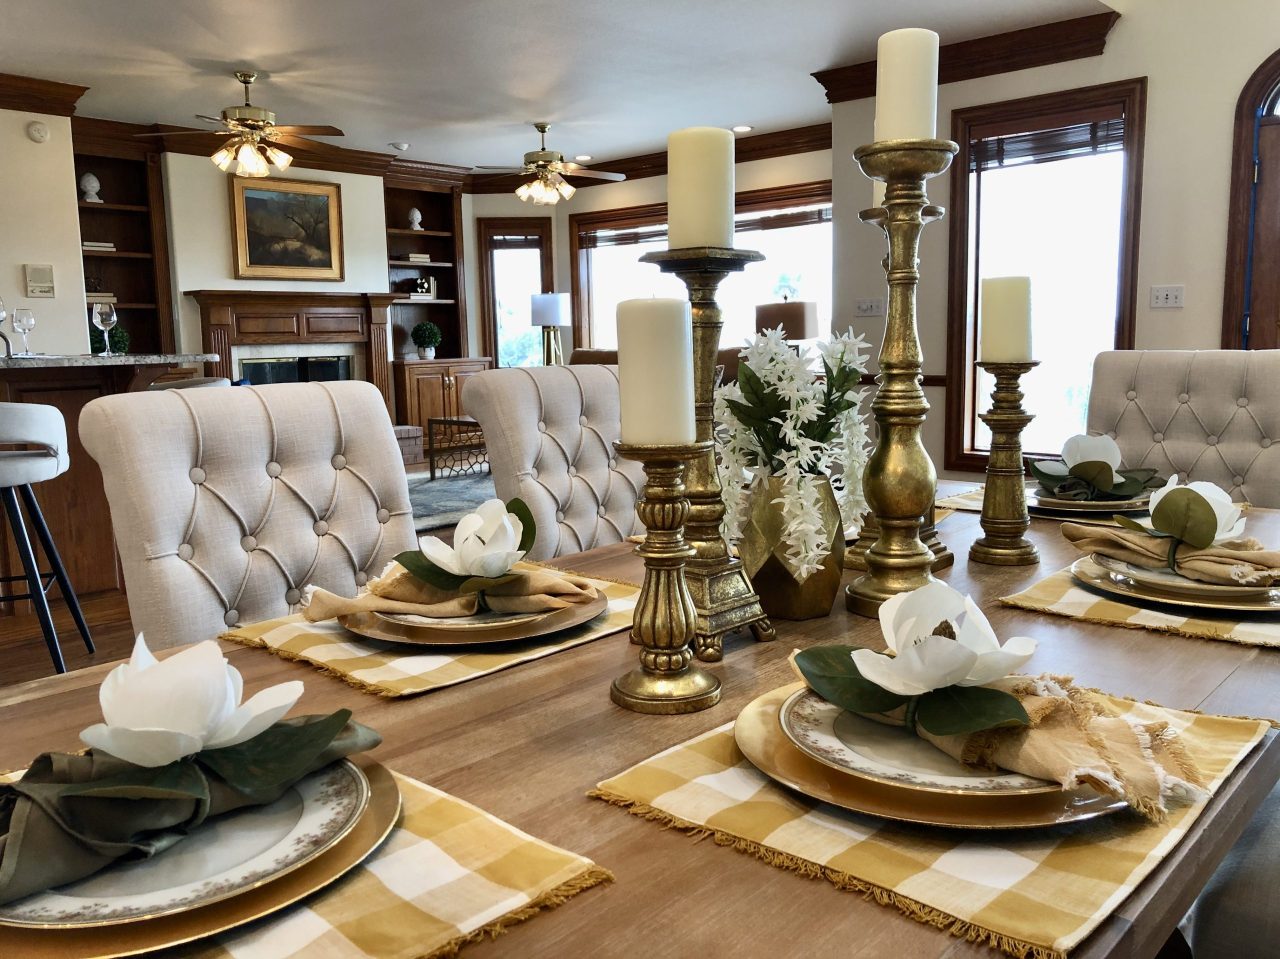 Interiors by Micka - first impressions of your formal dining room